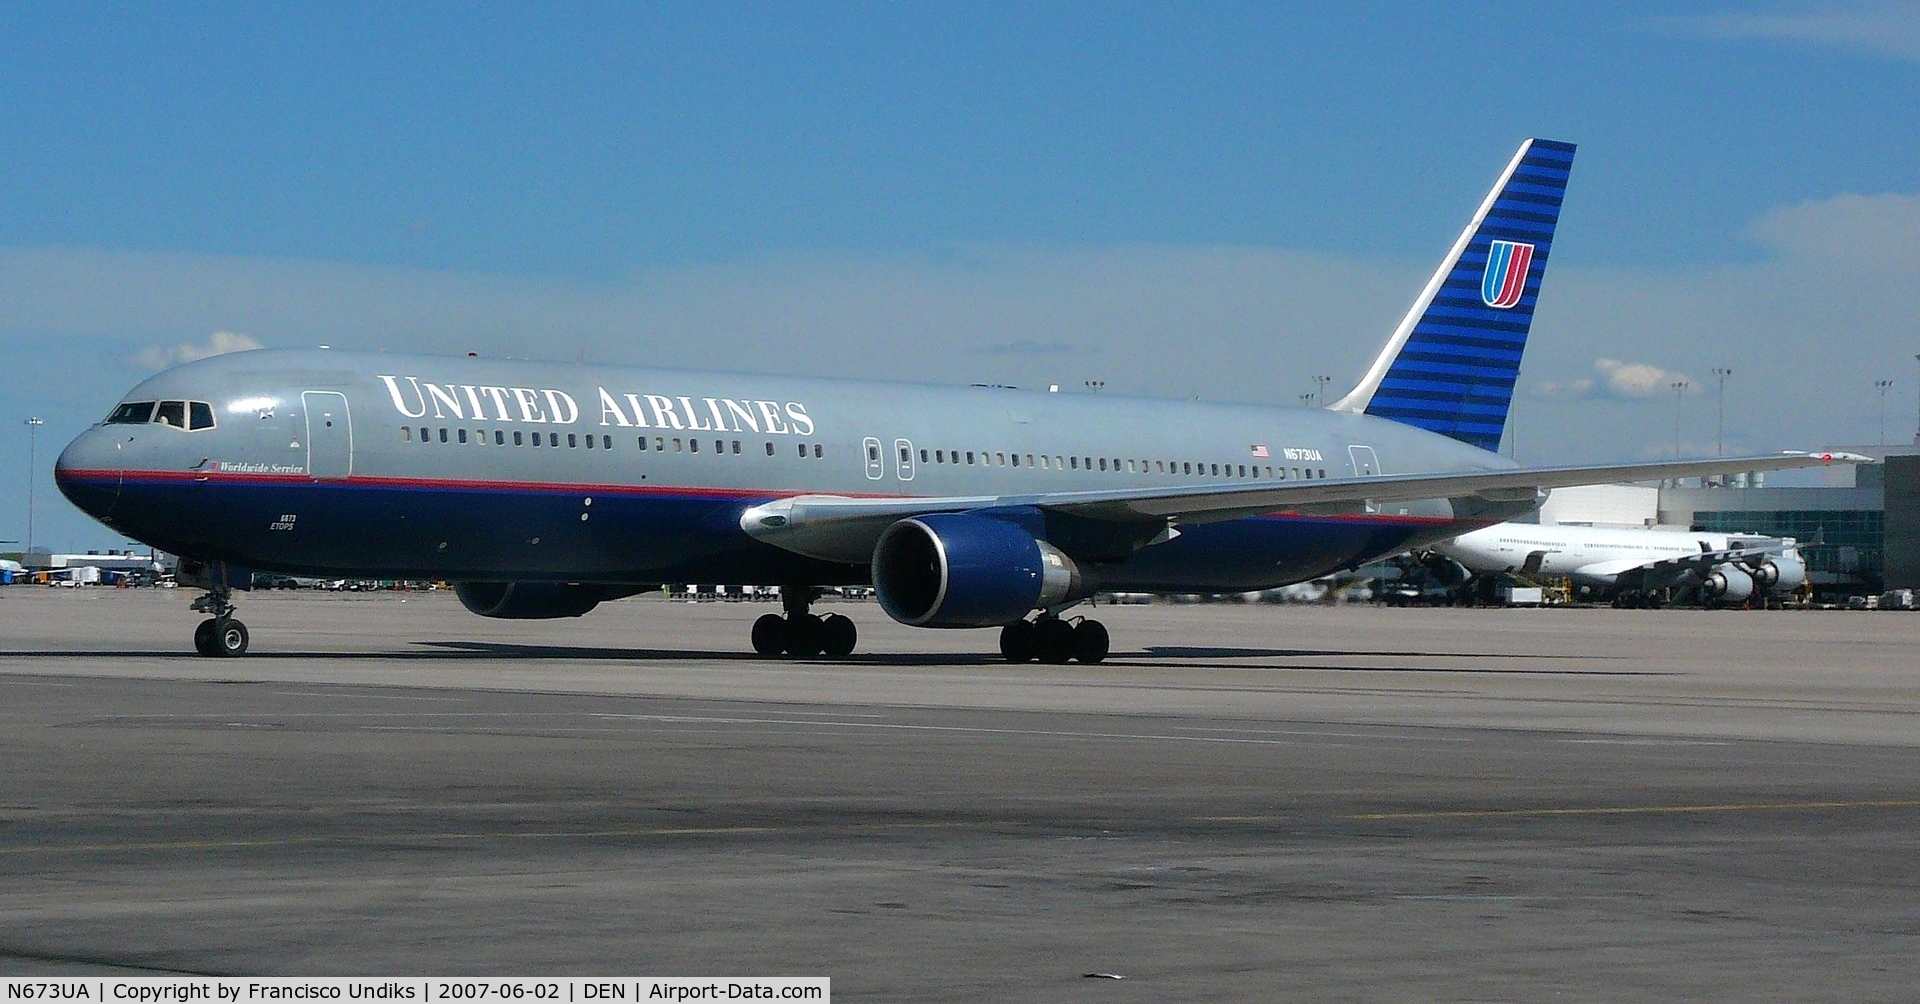 N673UA, 2000 Boeing 767-322 C/N 29241, United Airlines 767-300 just pushed from B36.